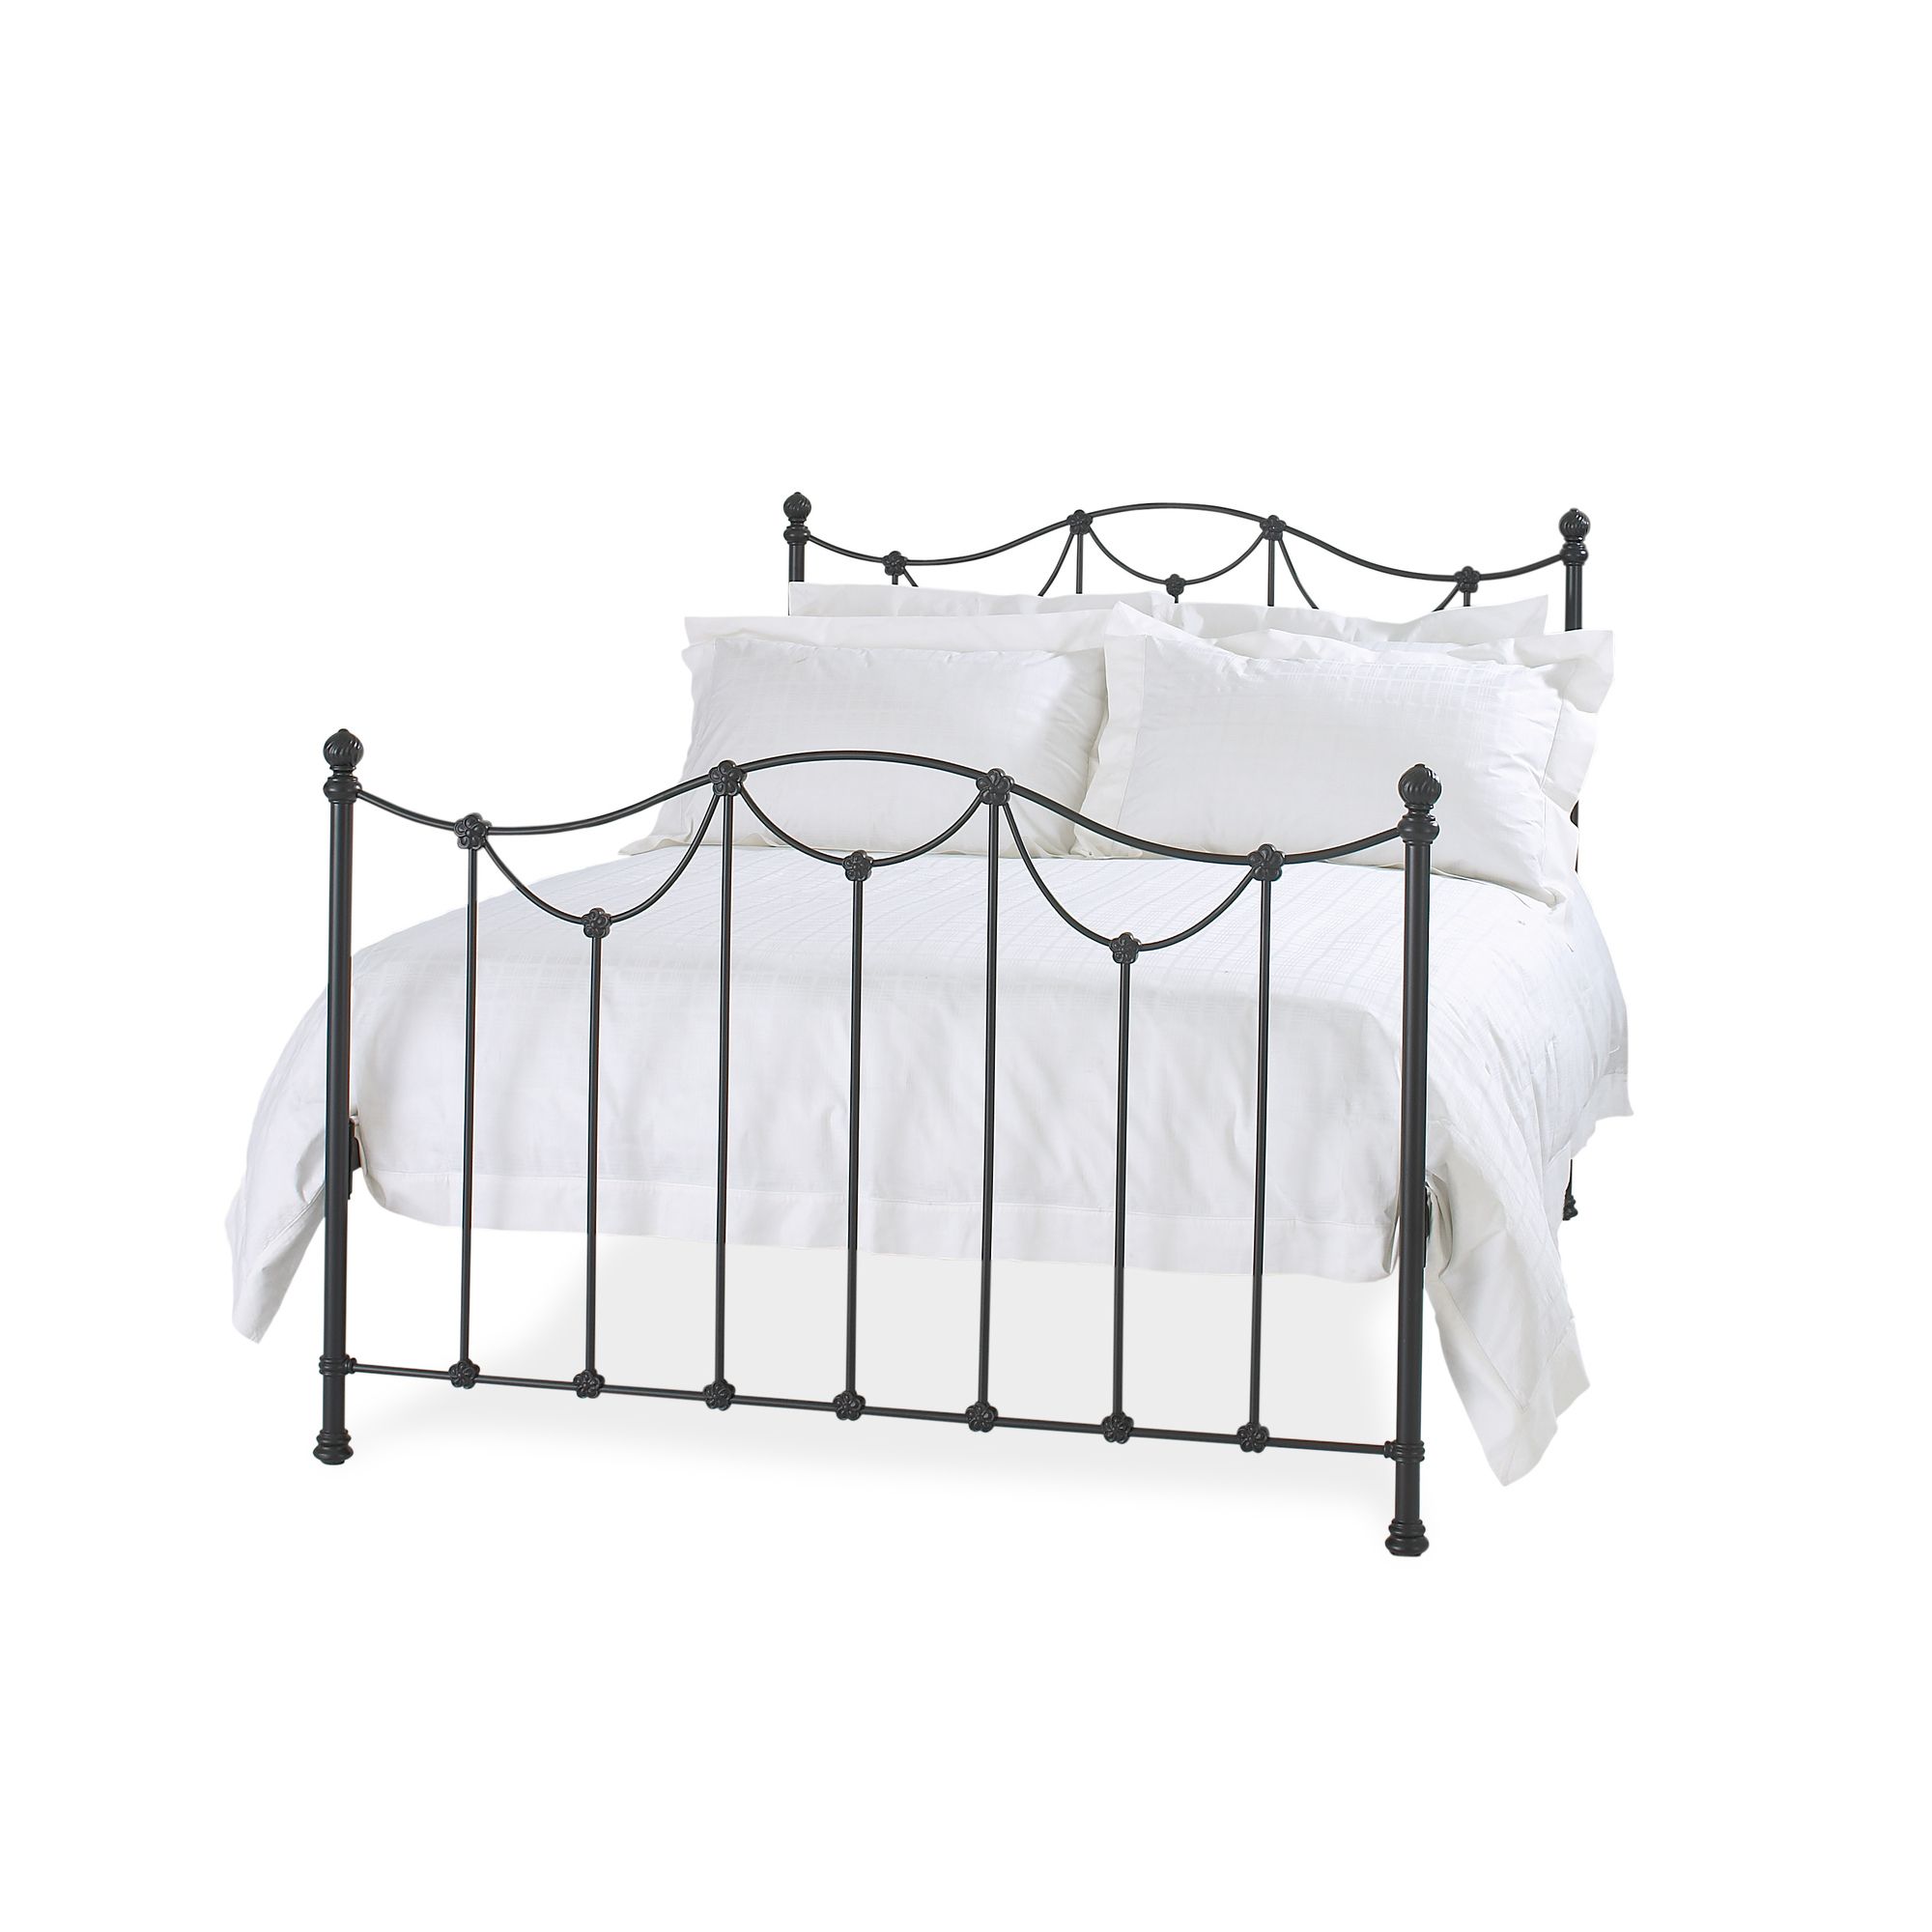 OBC Carie High Foot End Bed - Double - Satin Black at Tesco Direct